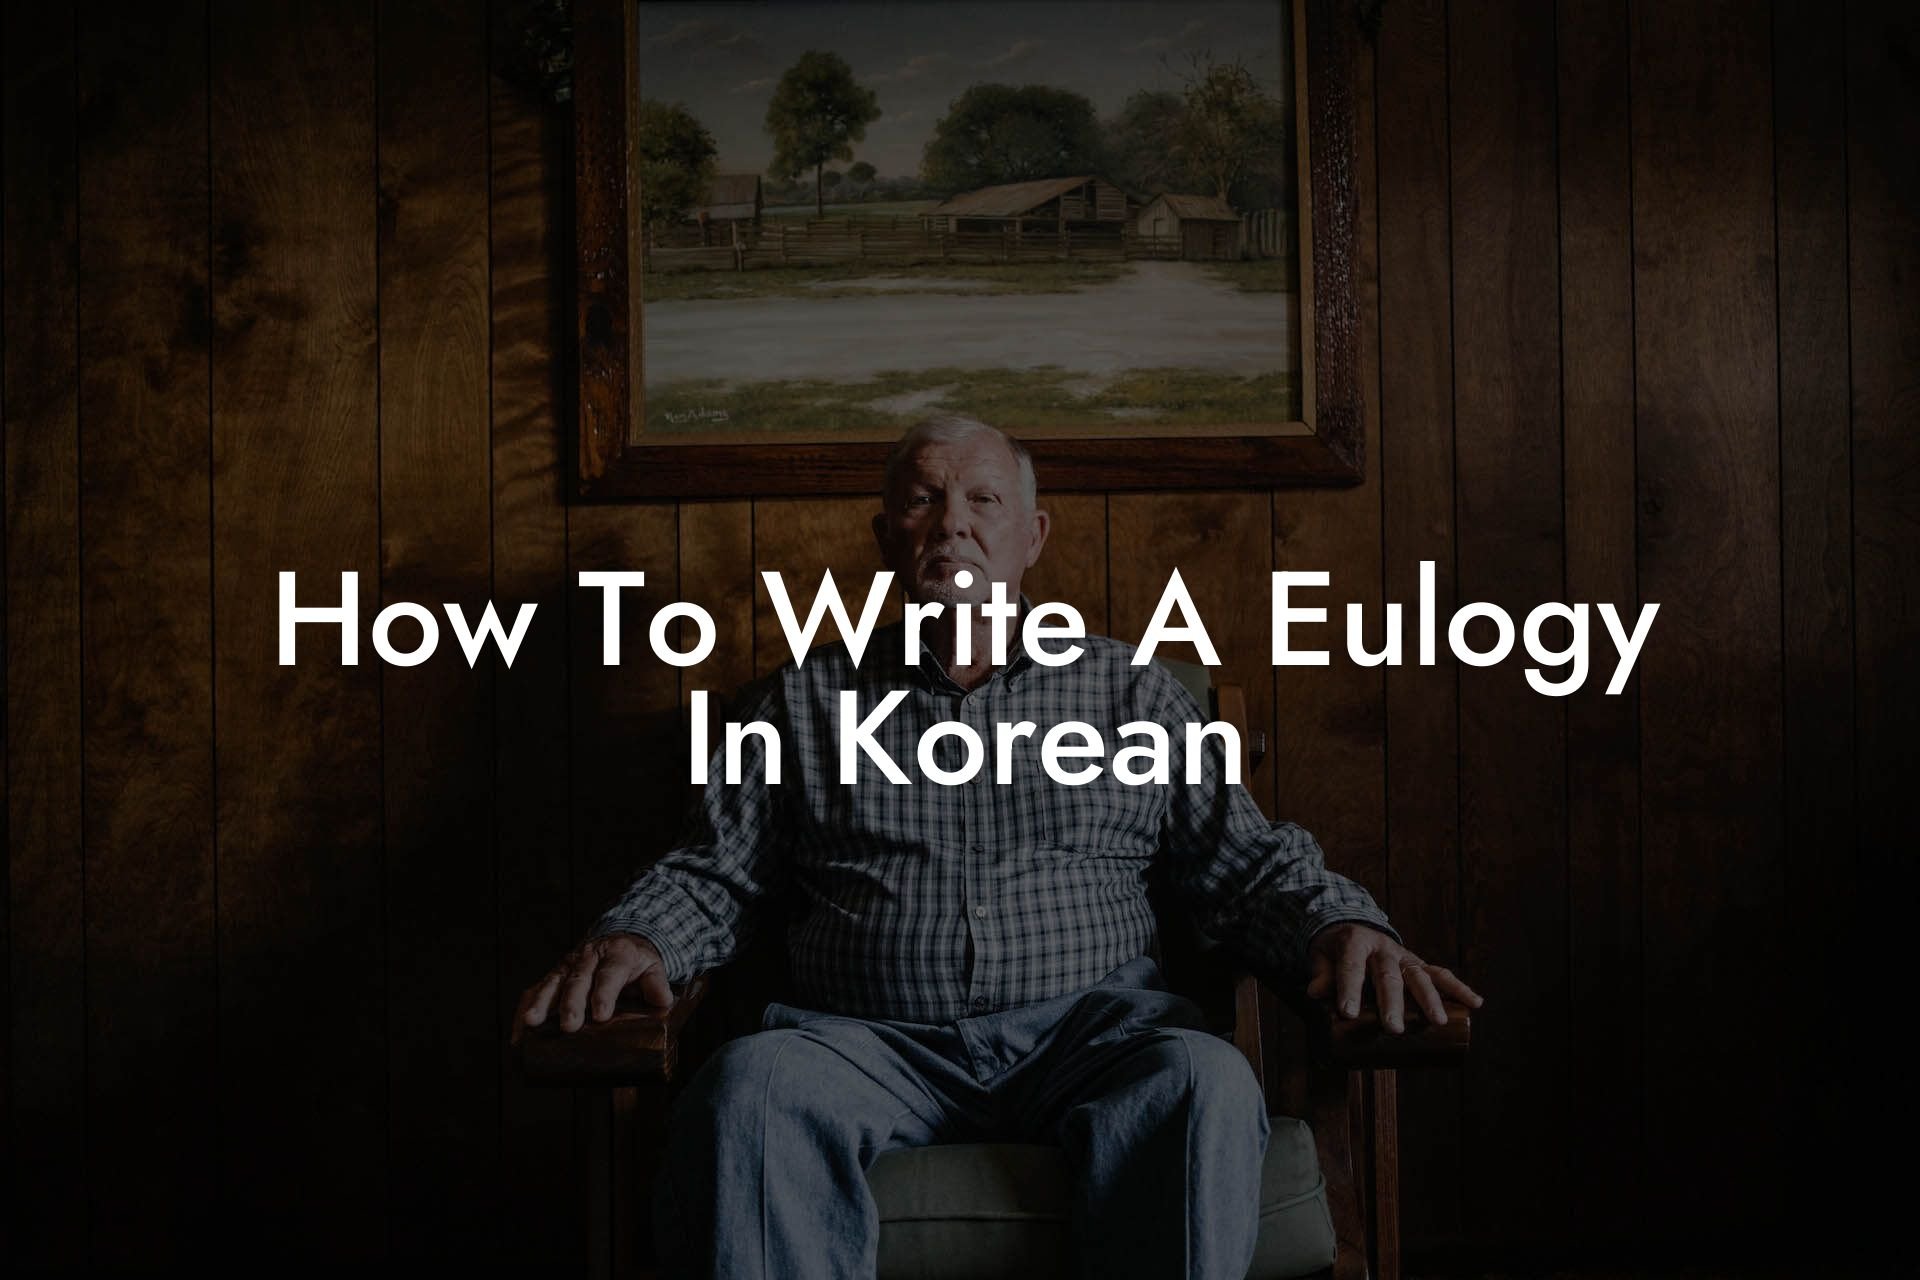 How To Write A Eulogy In Korean